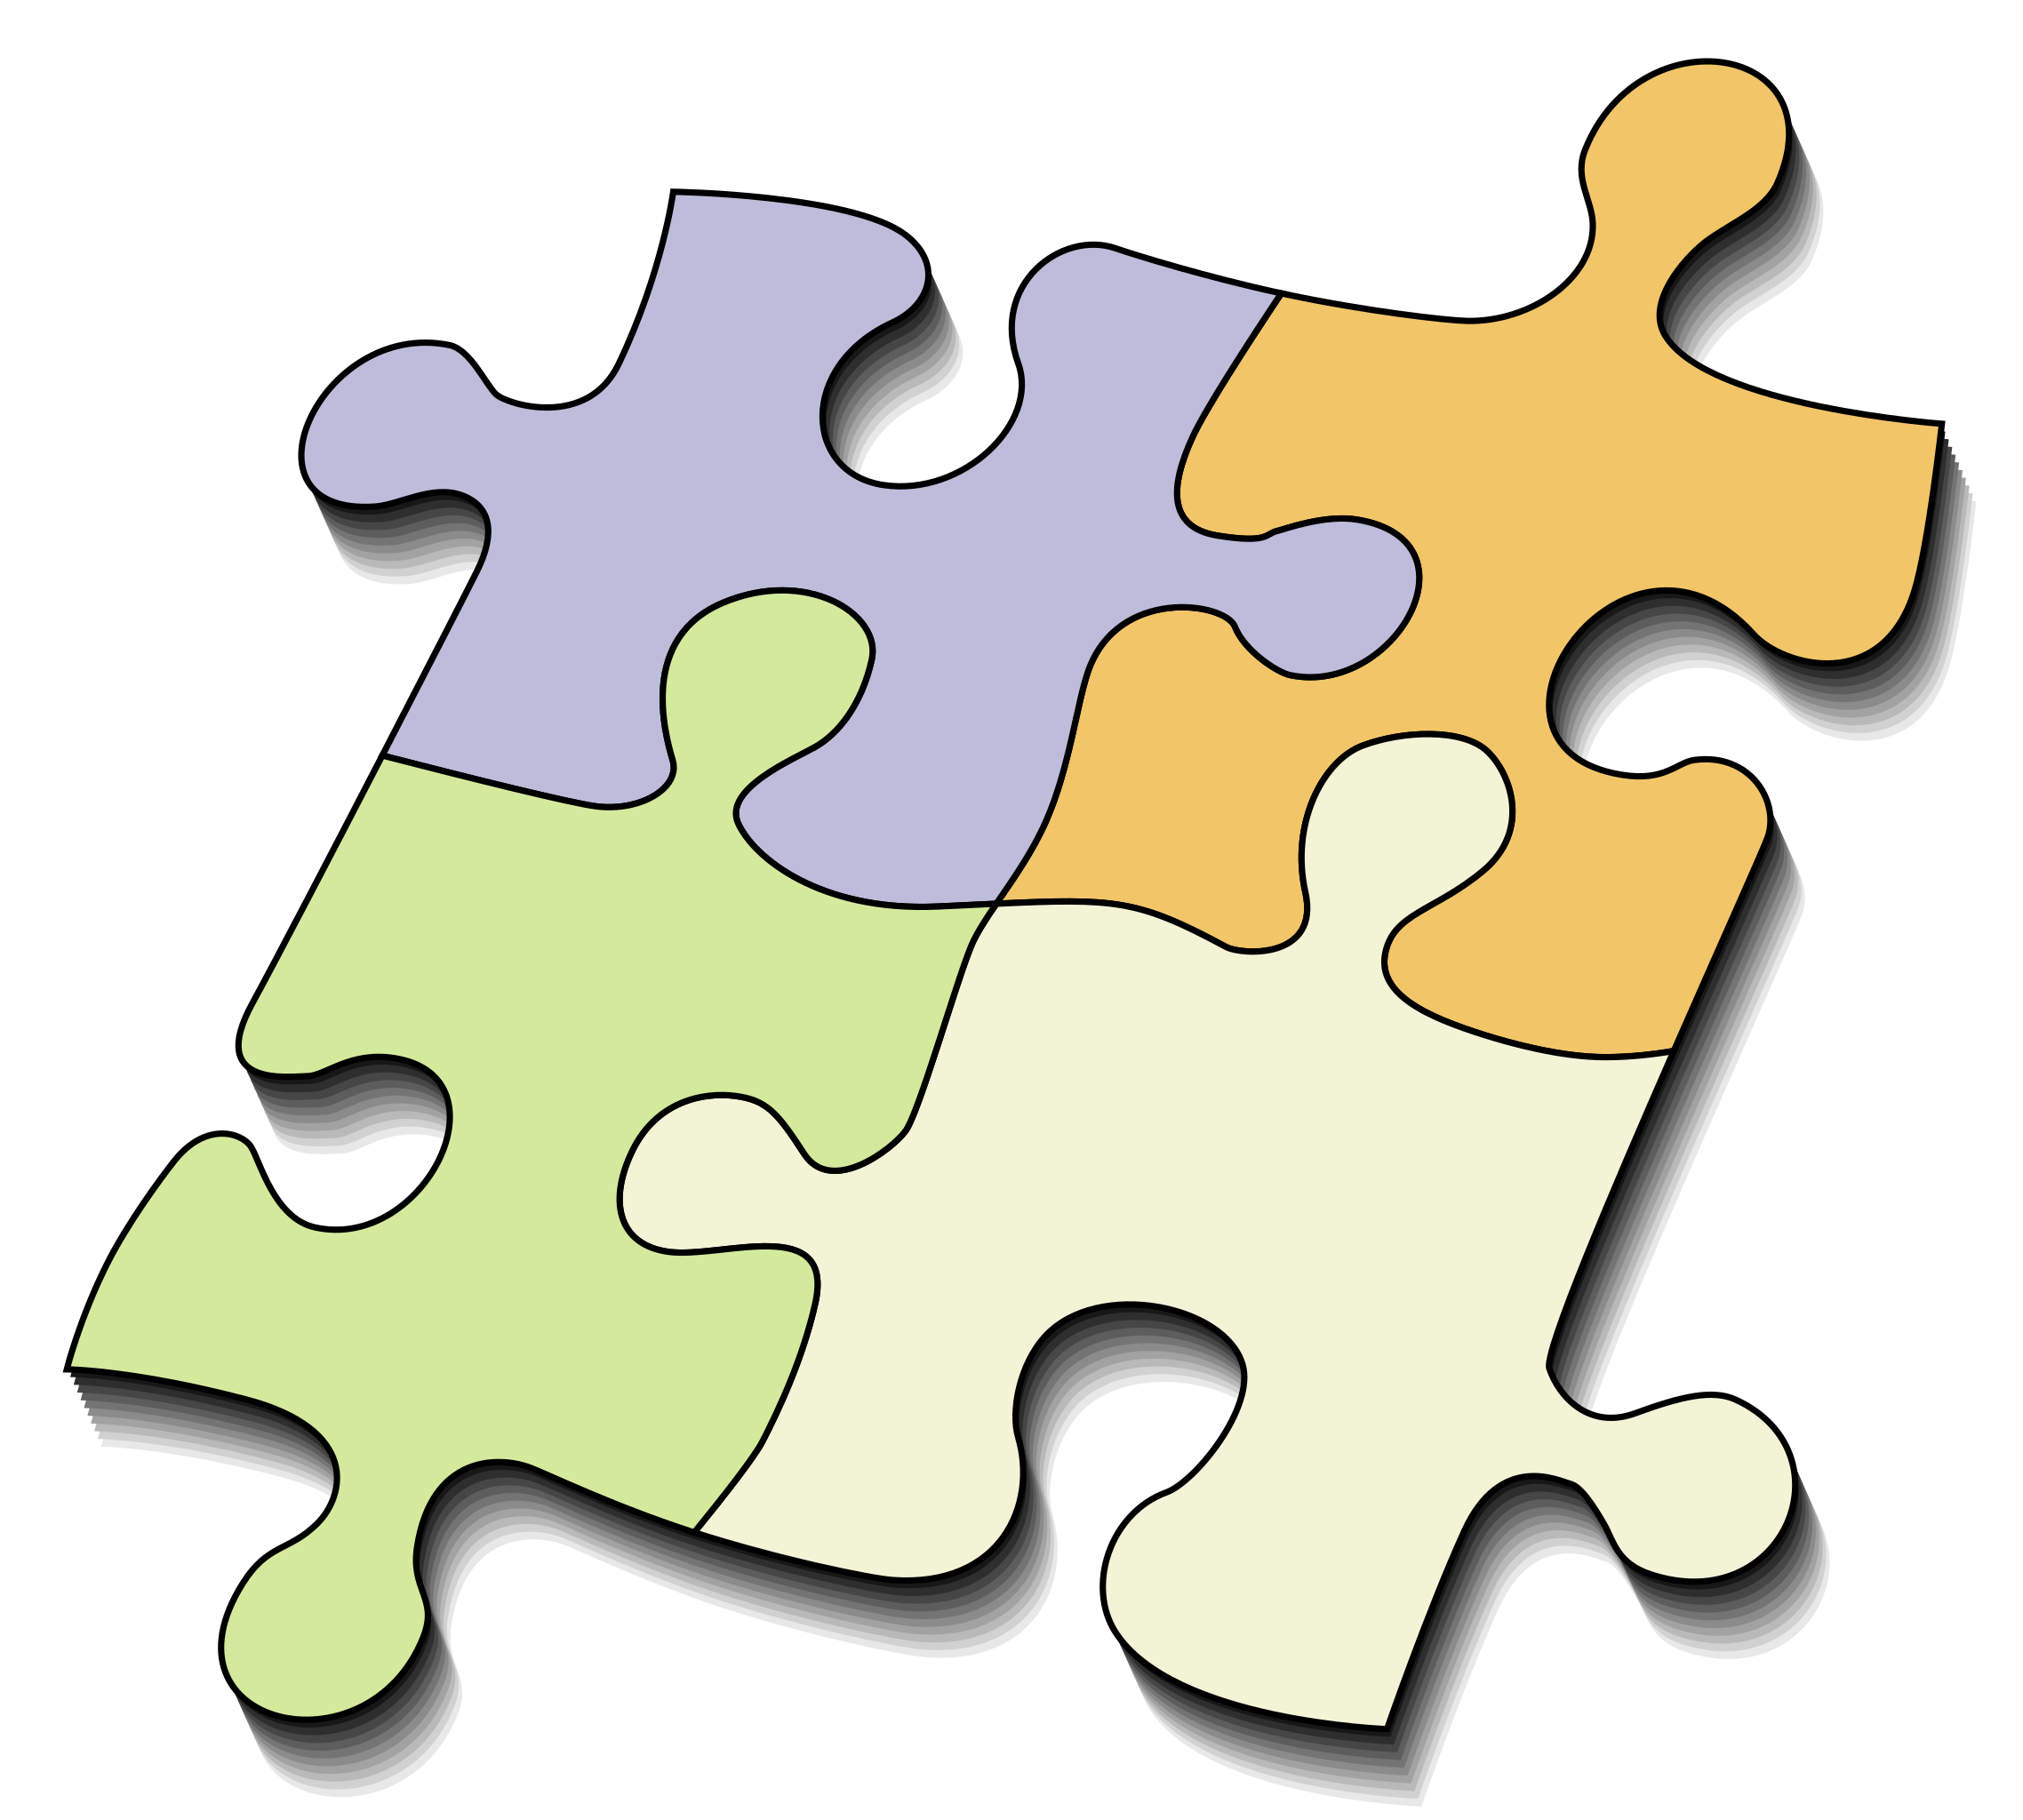 File:Jigsaw.svg - Wikimedia Commons For Jigsaw Puzzle Template For Word